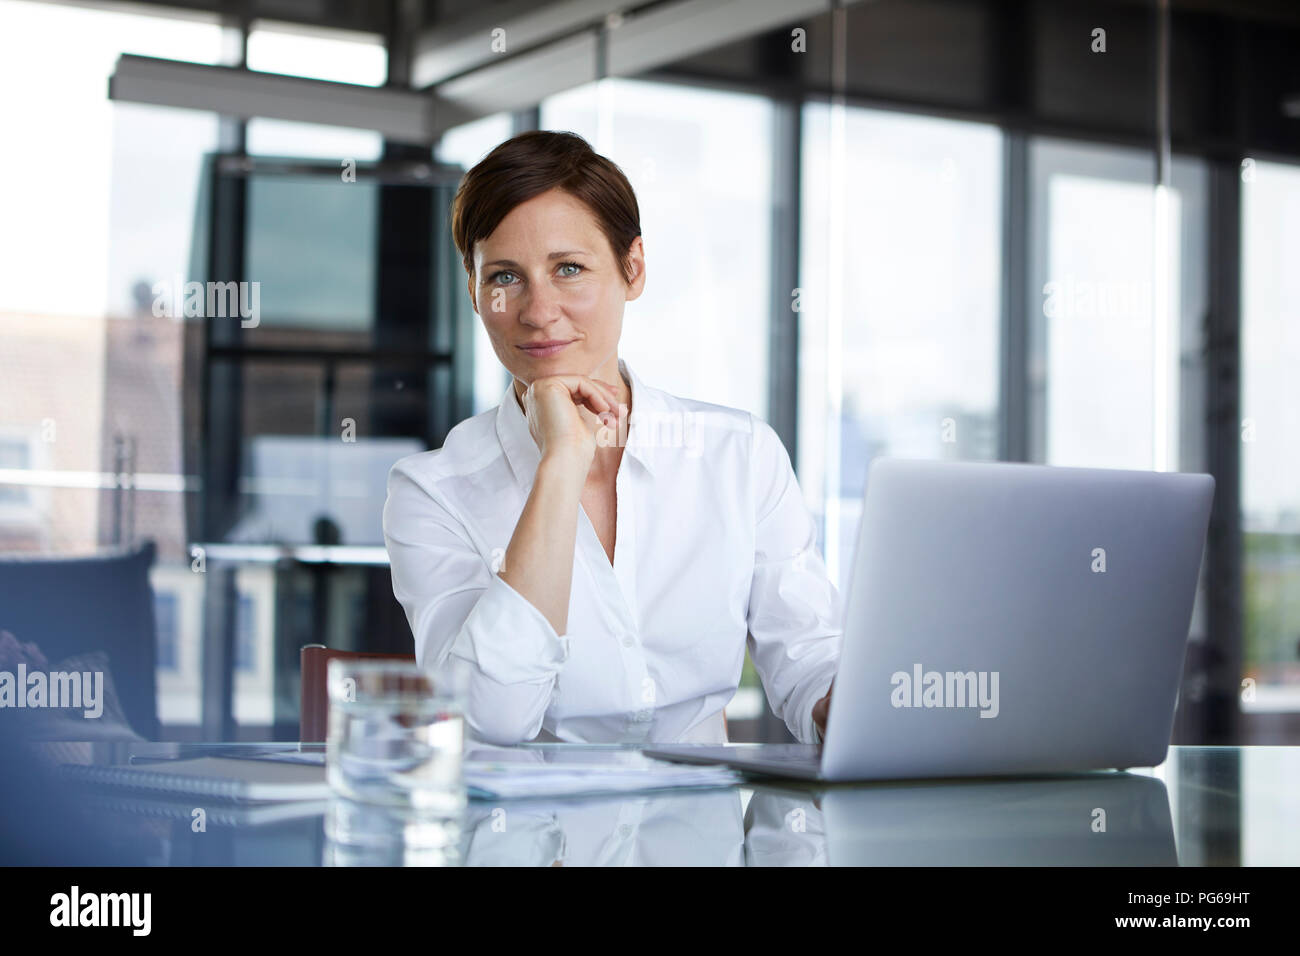 Portrait of confident businesswoman sitting at glass table in office with laptop Stock Photo